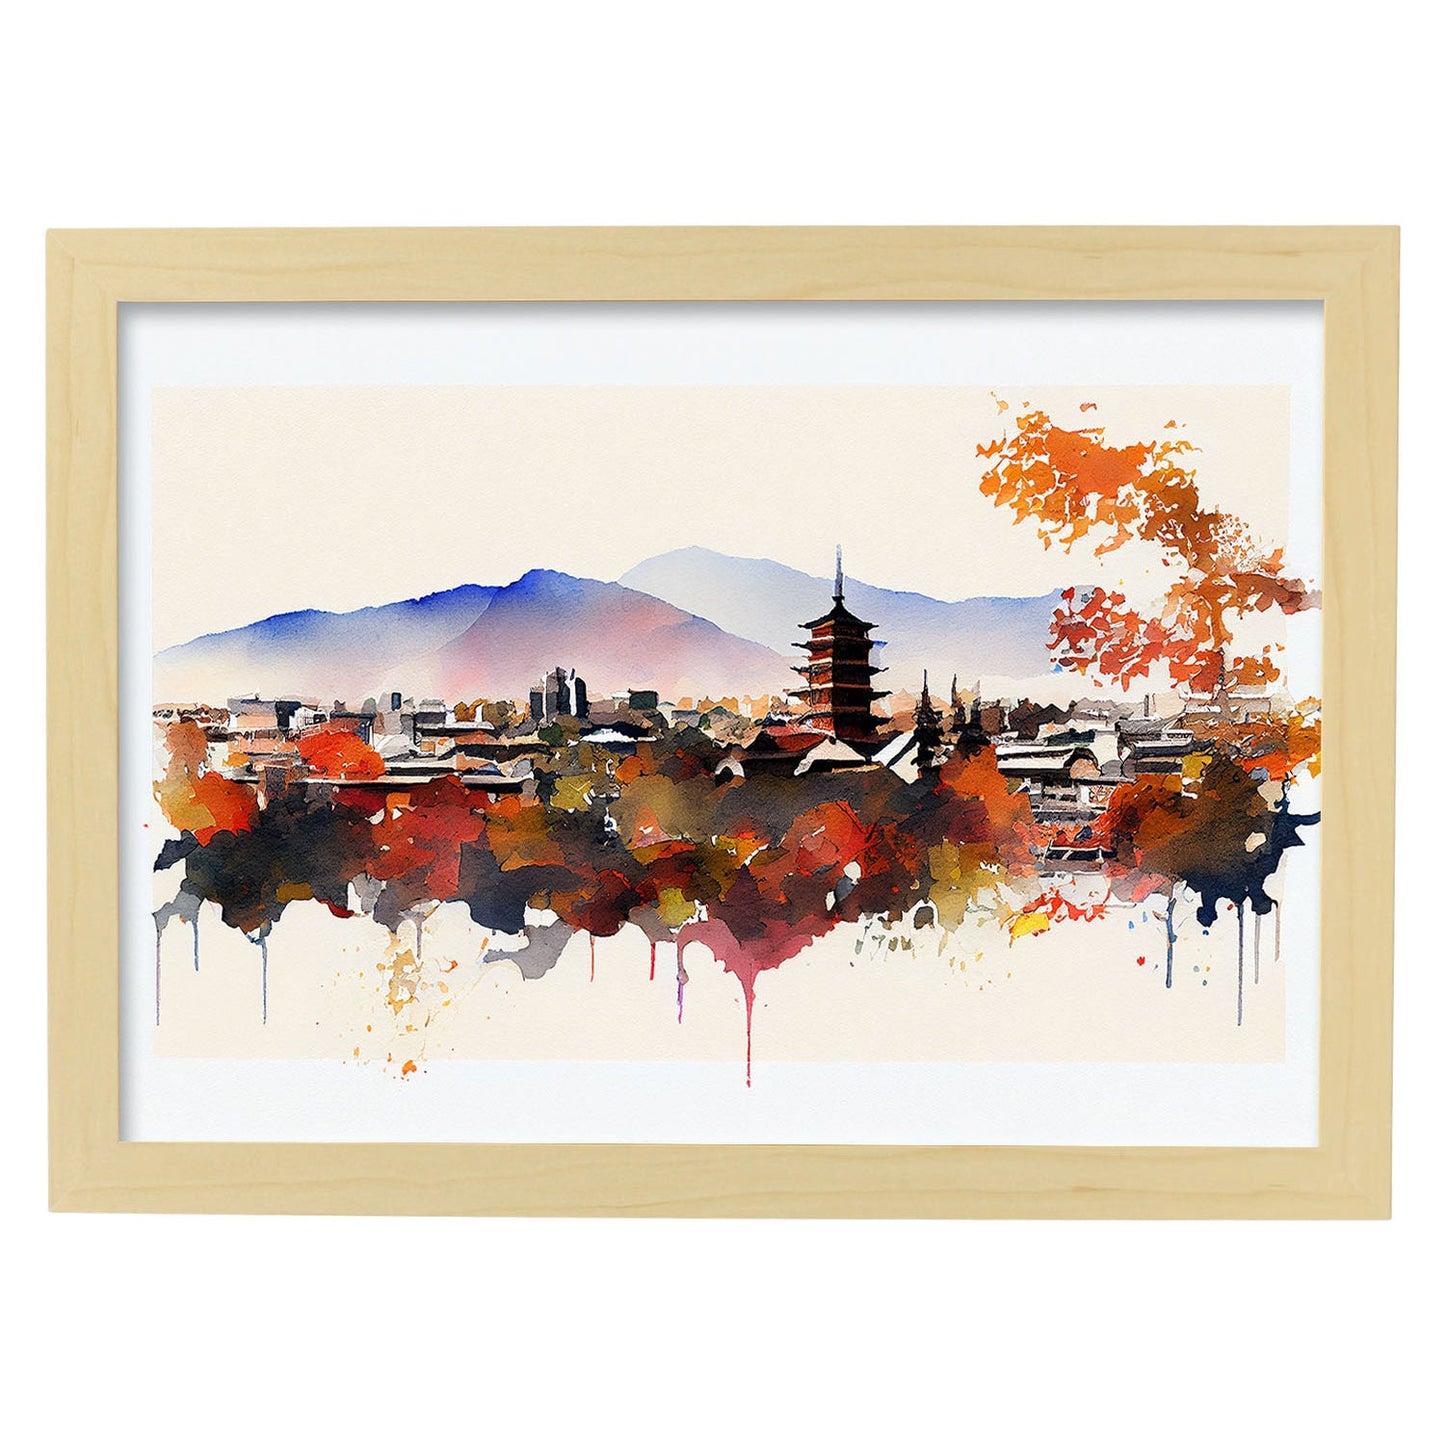 Nacnic watercolor of a skyline of the city of Kyoto_1. Aesthetic Wall Art Prints for Bedroom or Living Room Design.-Artwork-Nacnic-A4-Marco Madera Clara-Nacnic Estudio SL